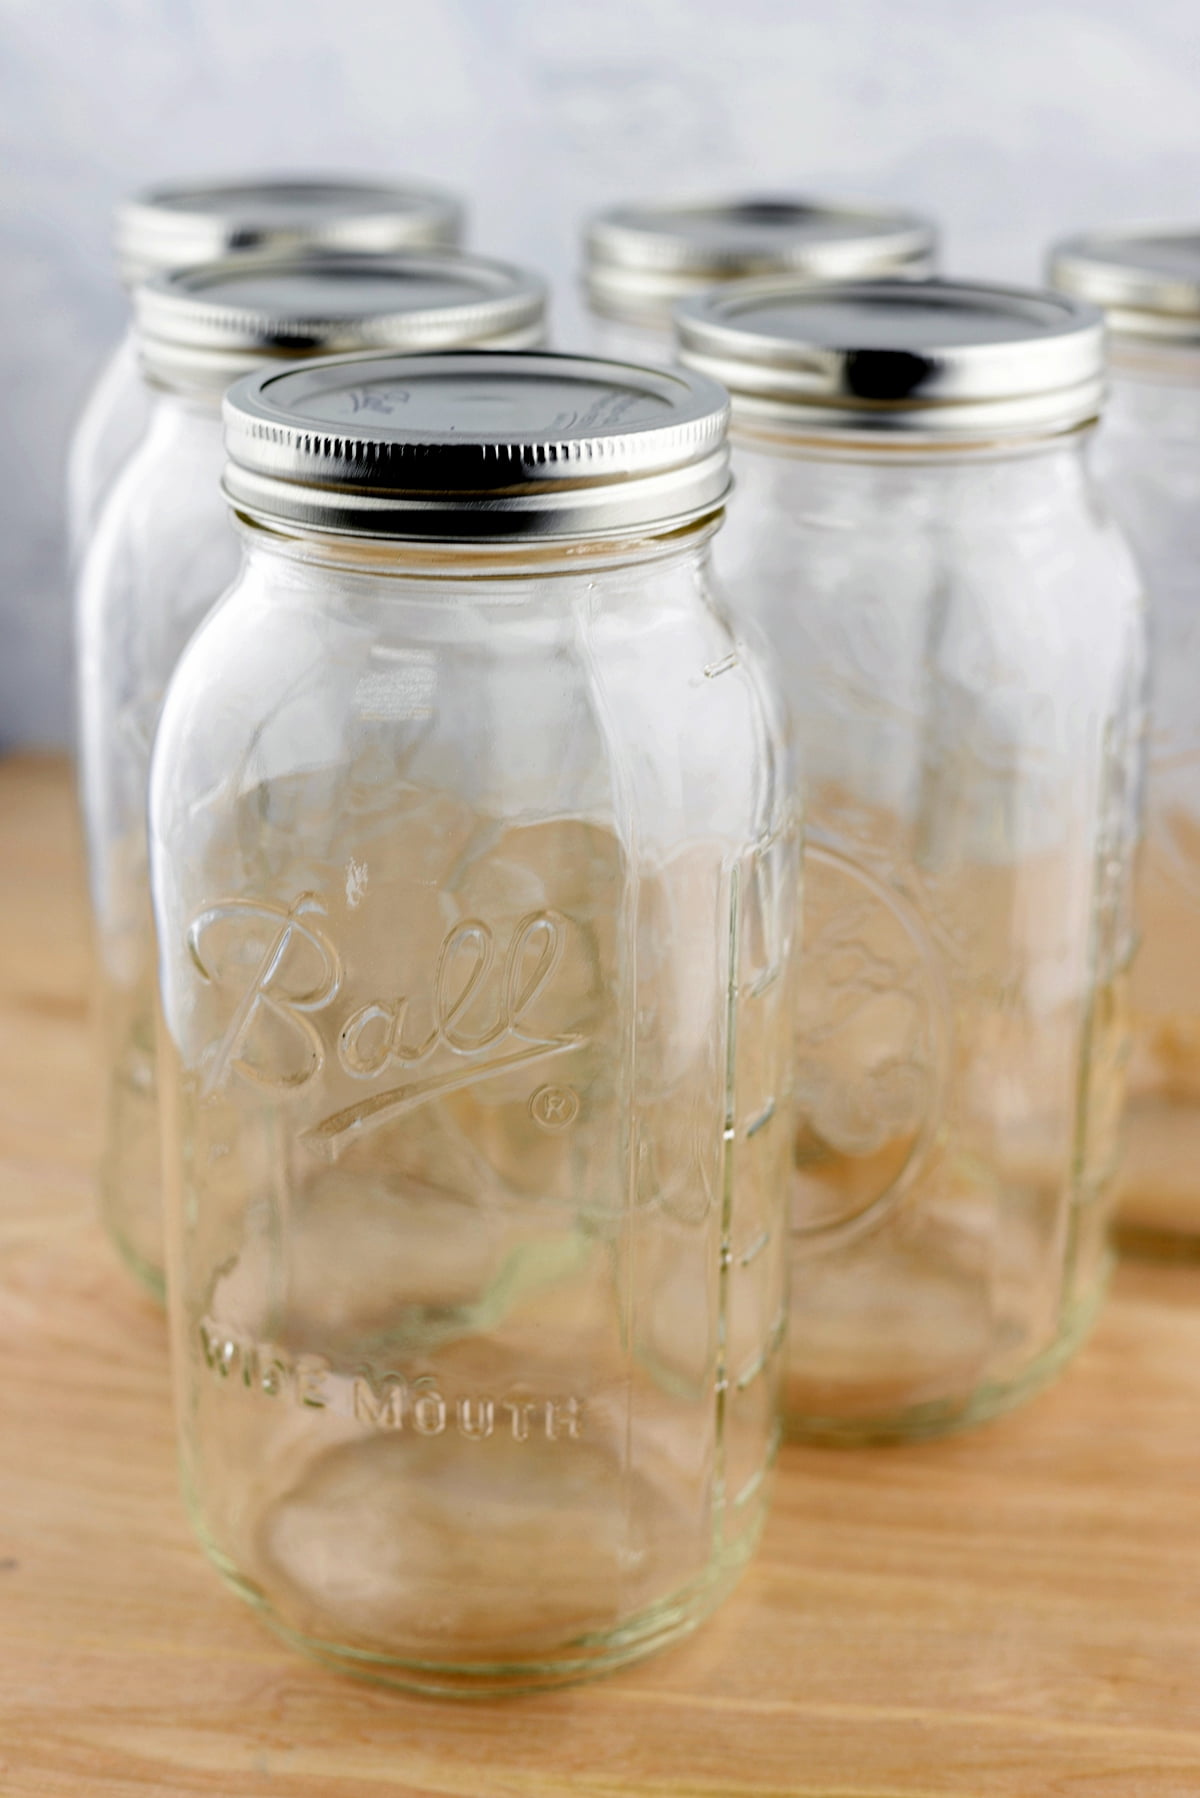 Pack of 6 Half Gallon Mason Jars Ball® Canning Jars Wide Mouth 9.25in. Tall  x 4.5in. Across 